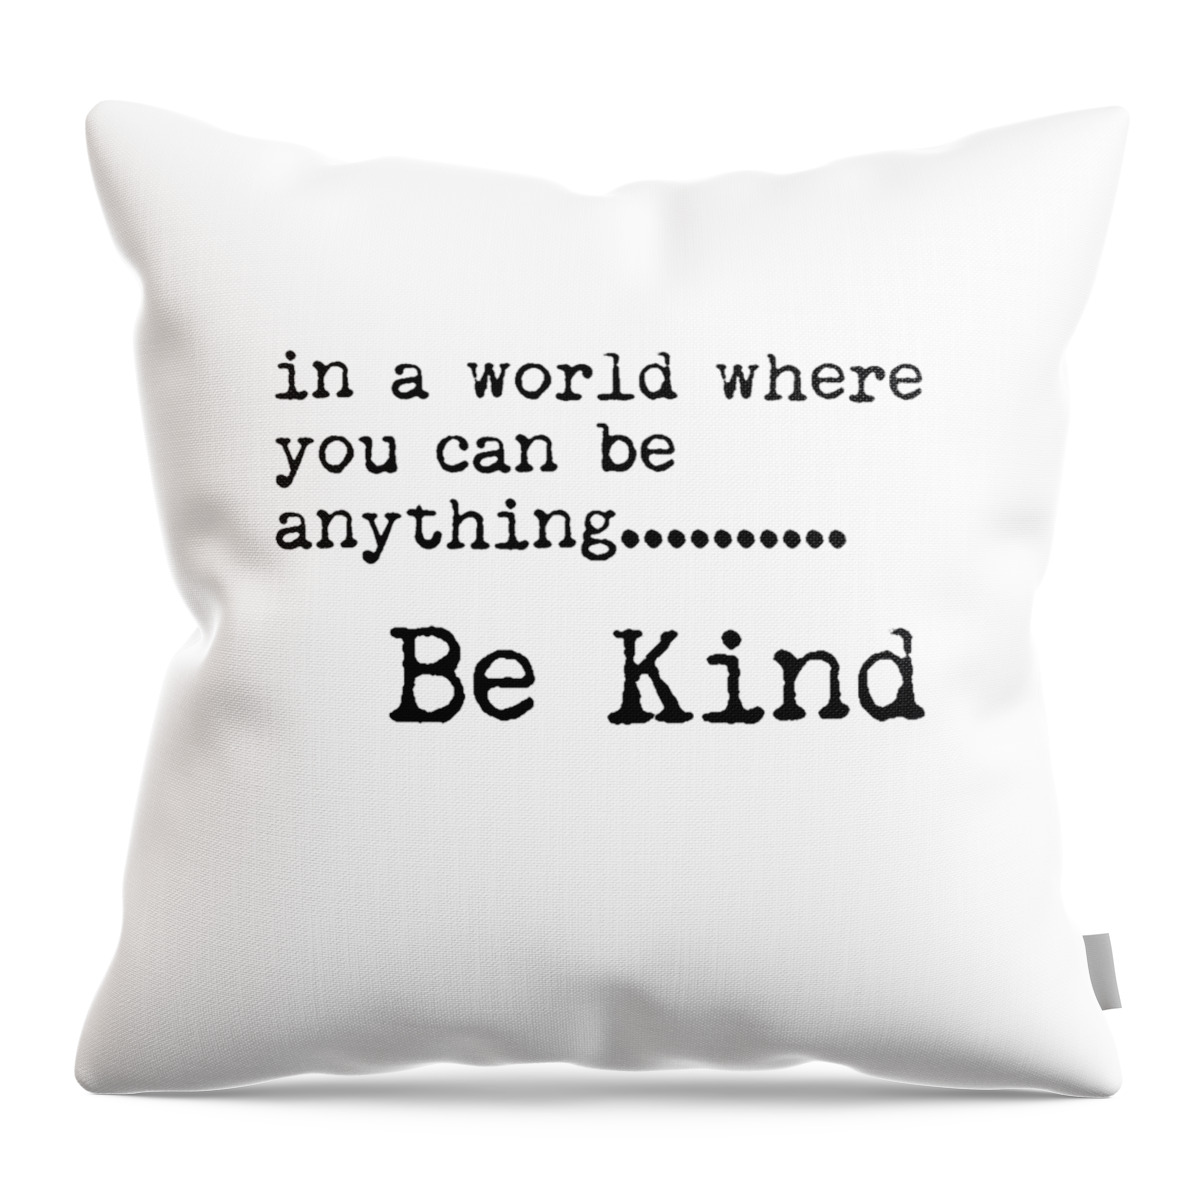 Be Kind Throw Pillow featuring the mixed media In a world where you can be anything, Be Kind - Motivational Quote Print - Typography Poster by Studio Grafiikka